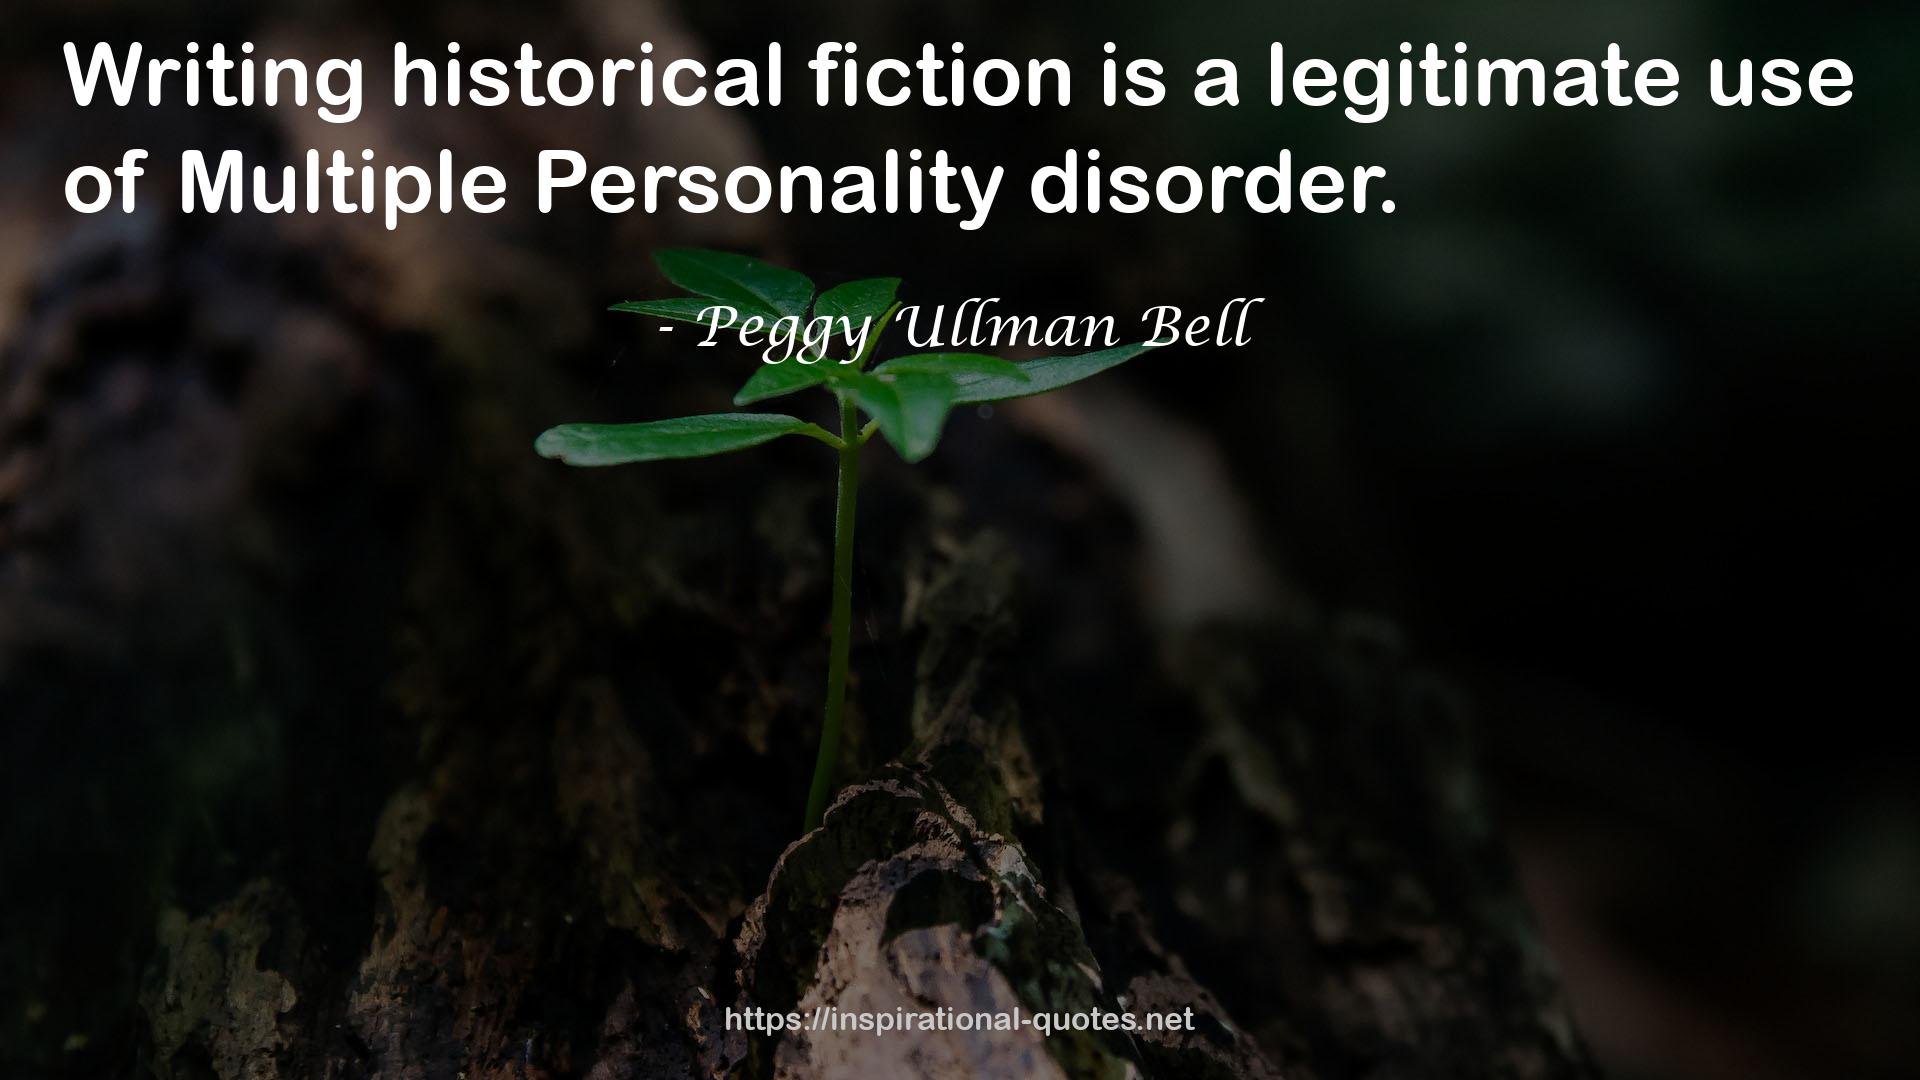 Peggy Ullman Bell QUOTES